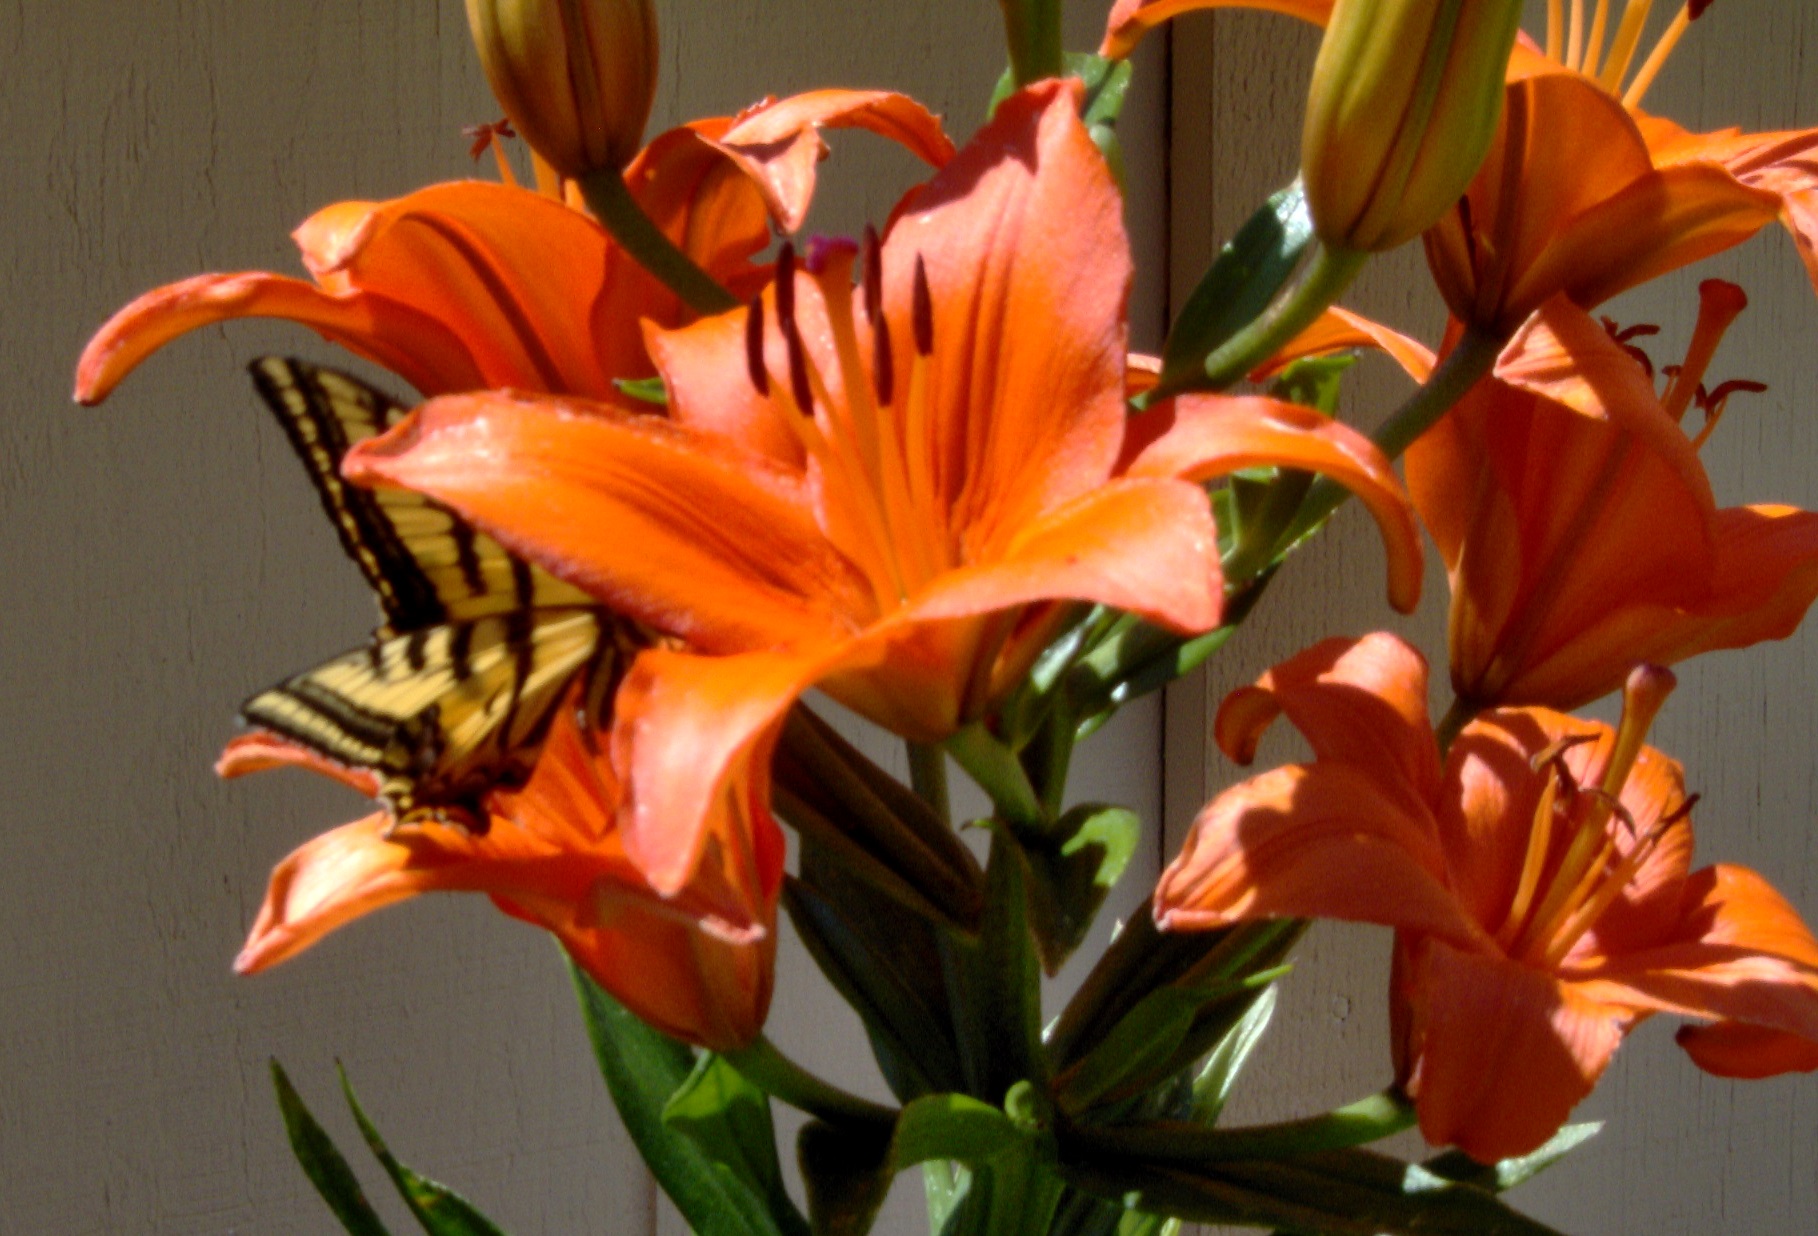 Butterfly on Lily